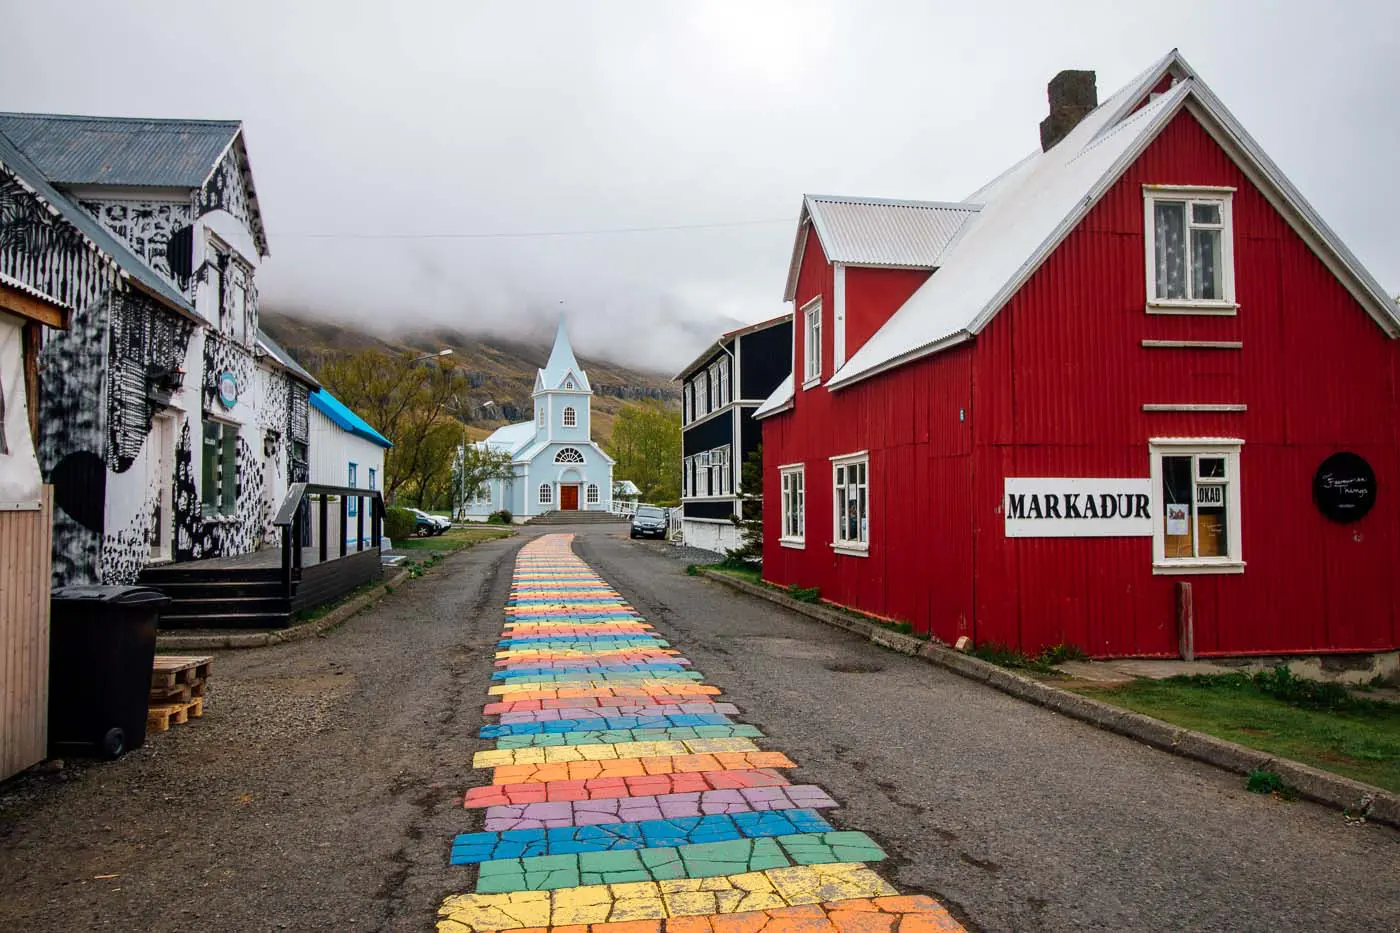 Painted rainbow road leading to a blue church